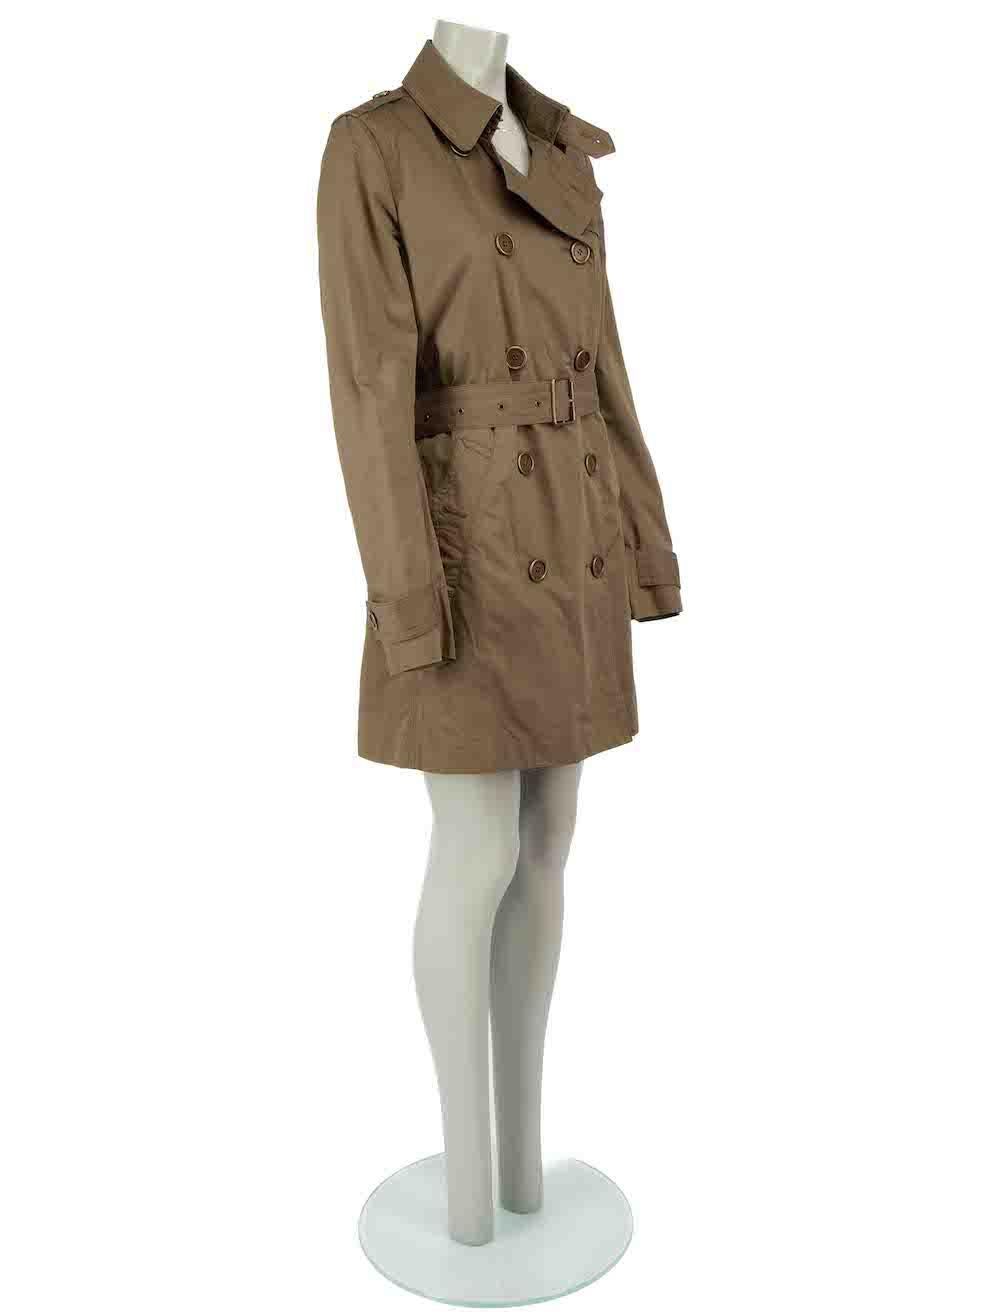 CONDITION is Very good. Minimal wear to coat is evident. Minimal wear to the right lapel lining with discoloured marks on this used Burberry Brit designer resale item.
 
 Details
 Green
 Cotton
 Trench coat
 Removable internal layer
 Belted
 Button